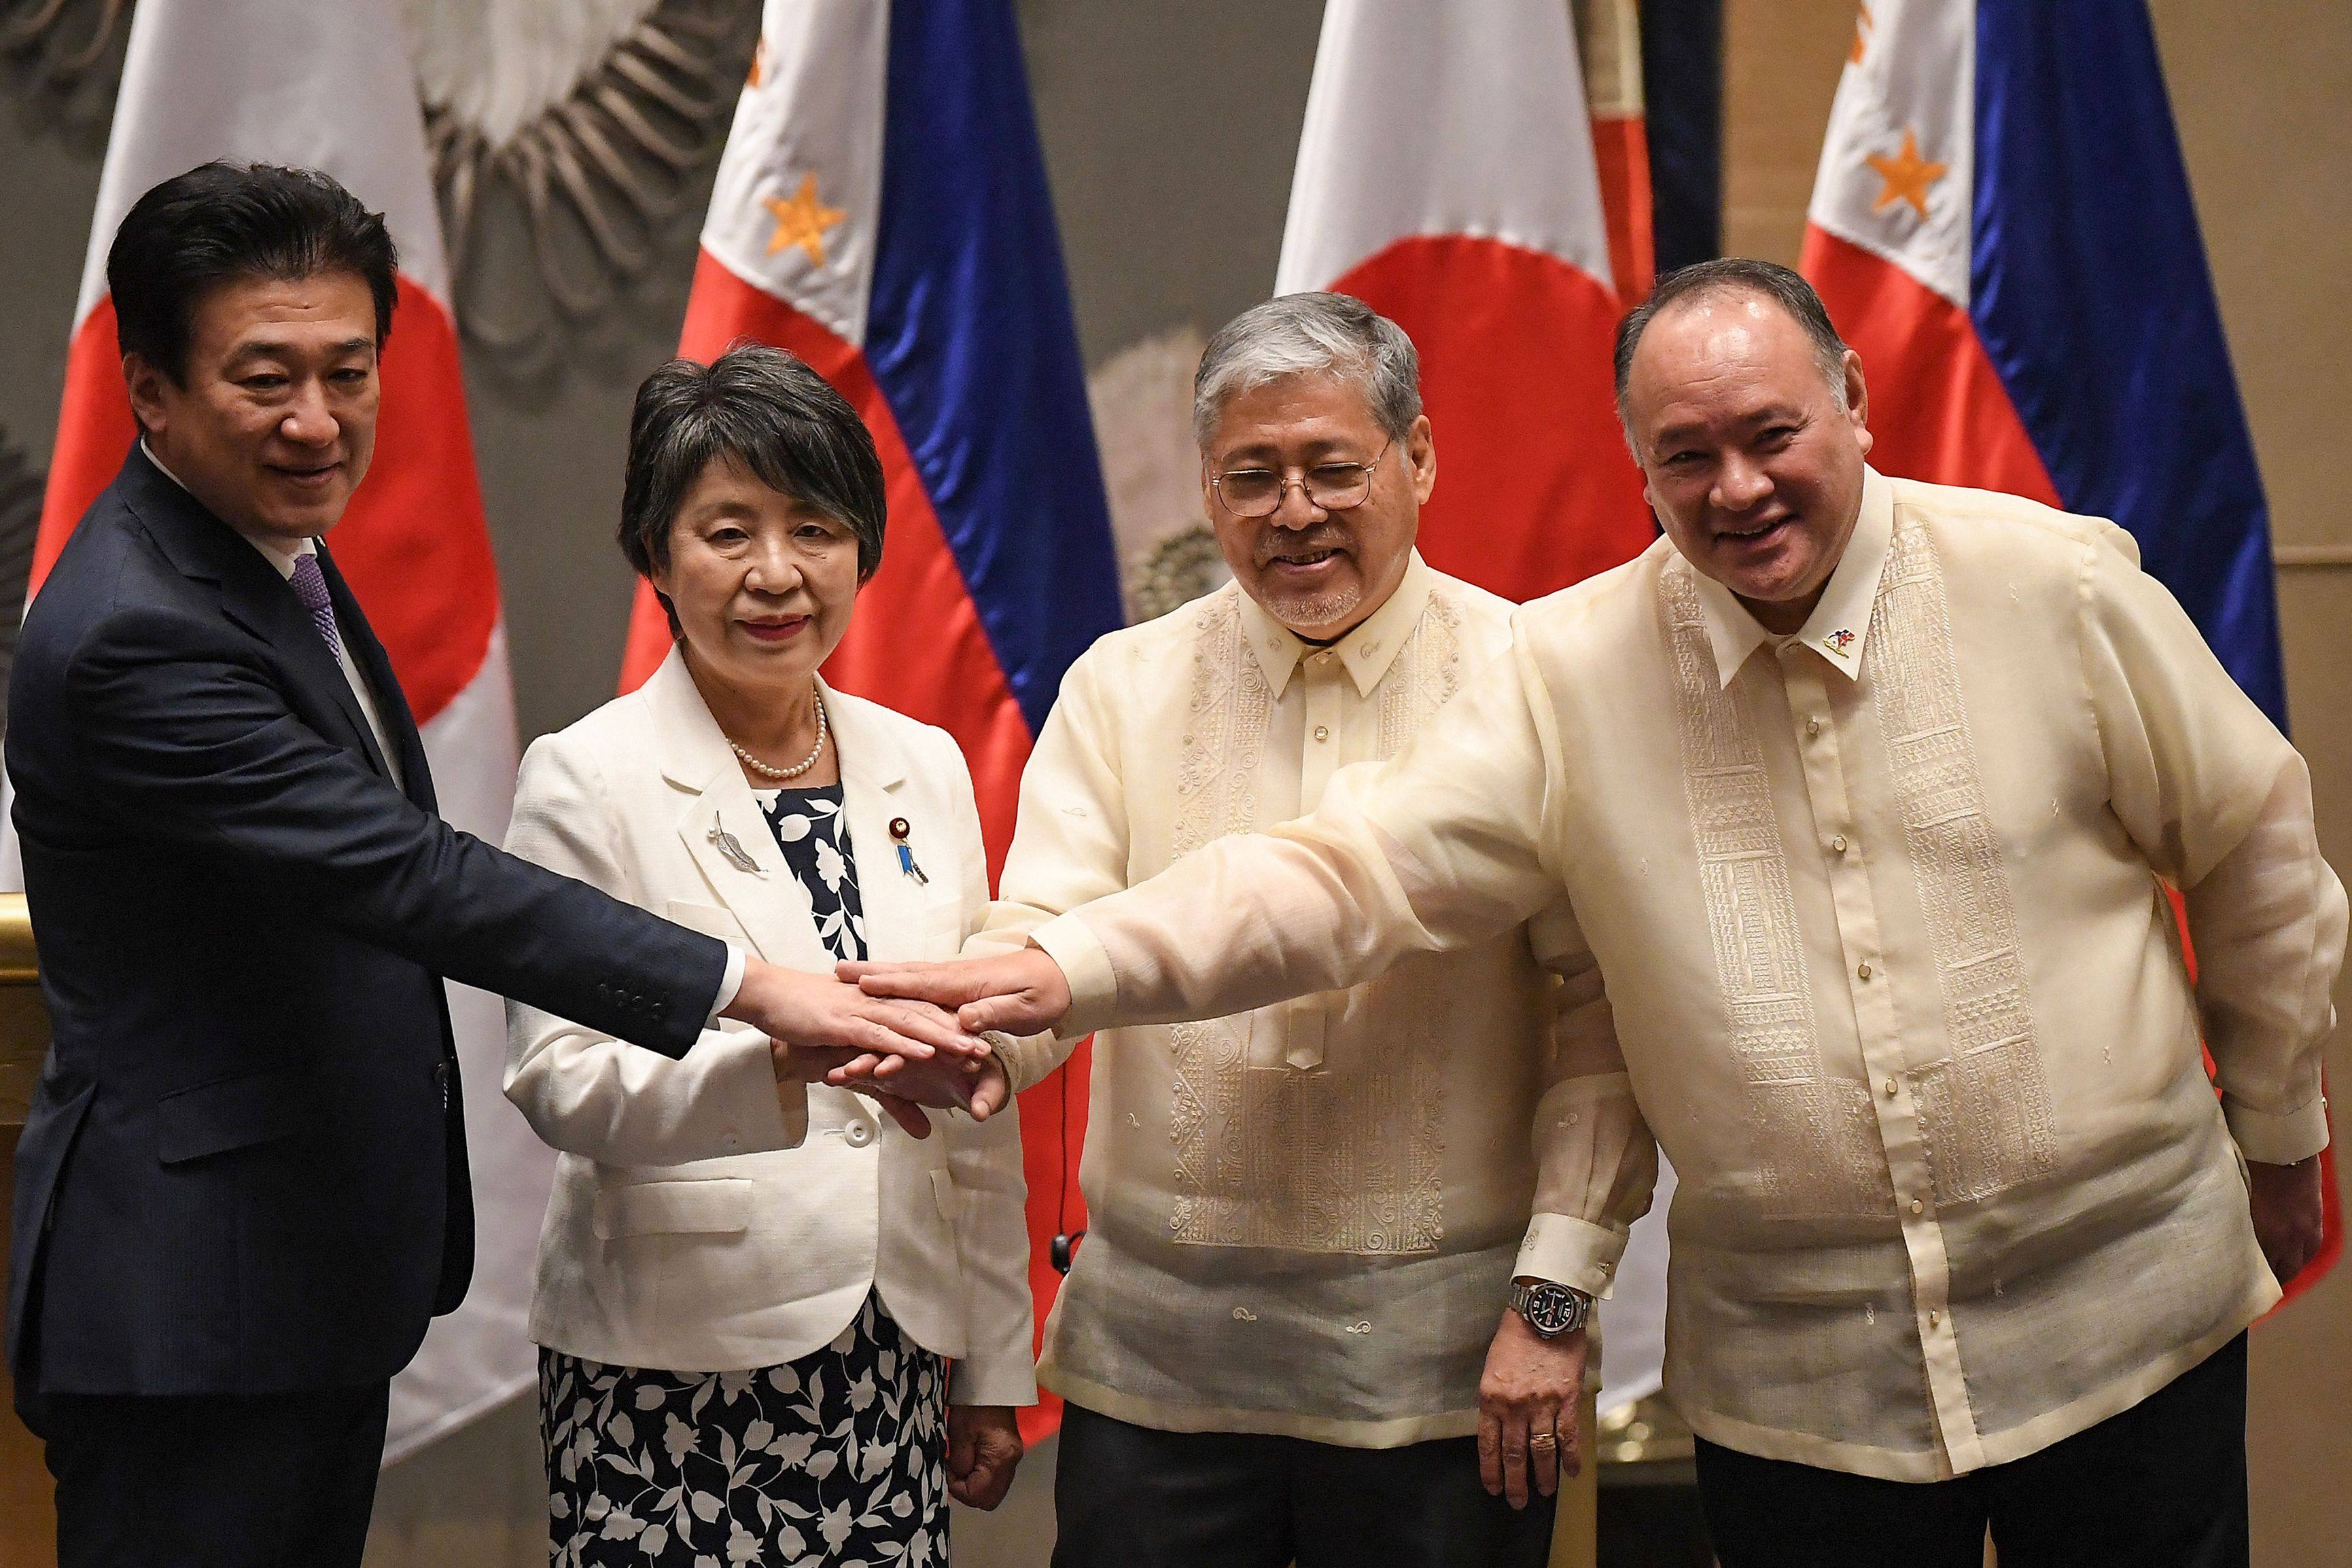 From left: Japan’s Defence Minister Minoru Kihara and Foreign Minister Yoko Kamikawa join hands with Philippine Foreign Secretary Enrique Manalo and Defence Secretary Gilberto Teodoro after a meeting in Manila on July 8. Photo: AFP